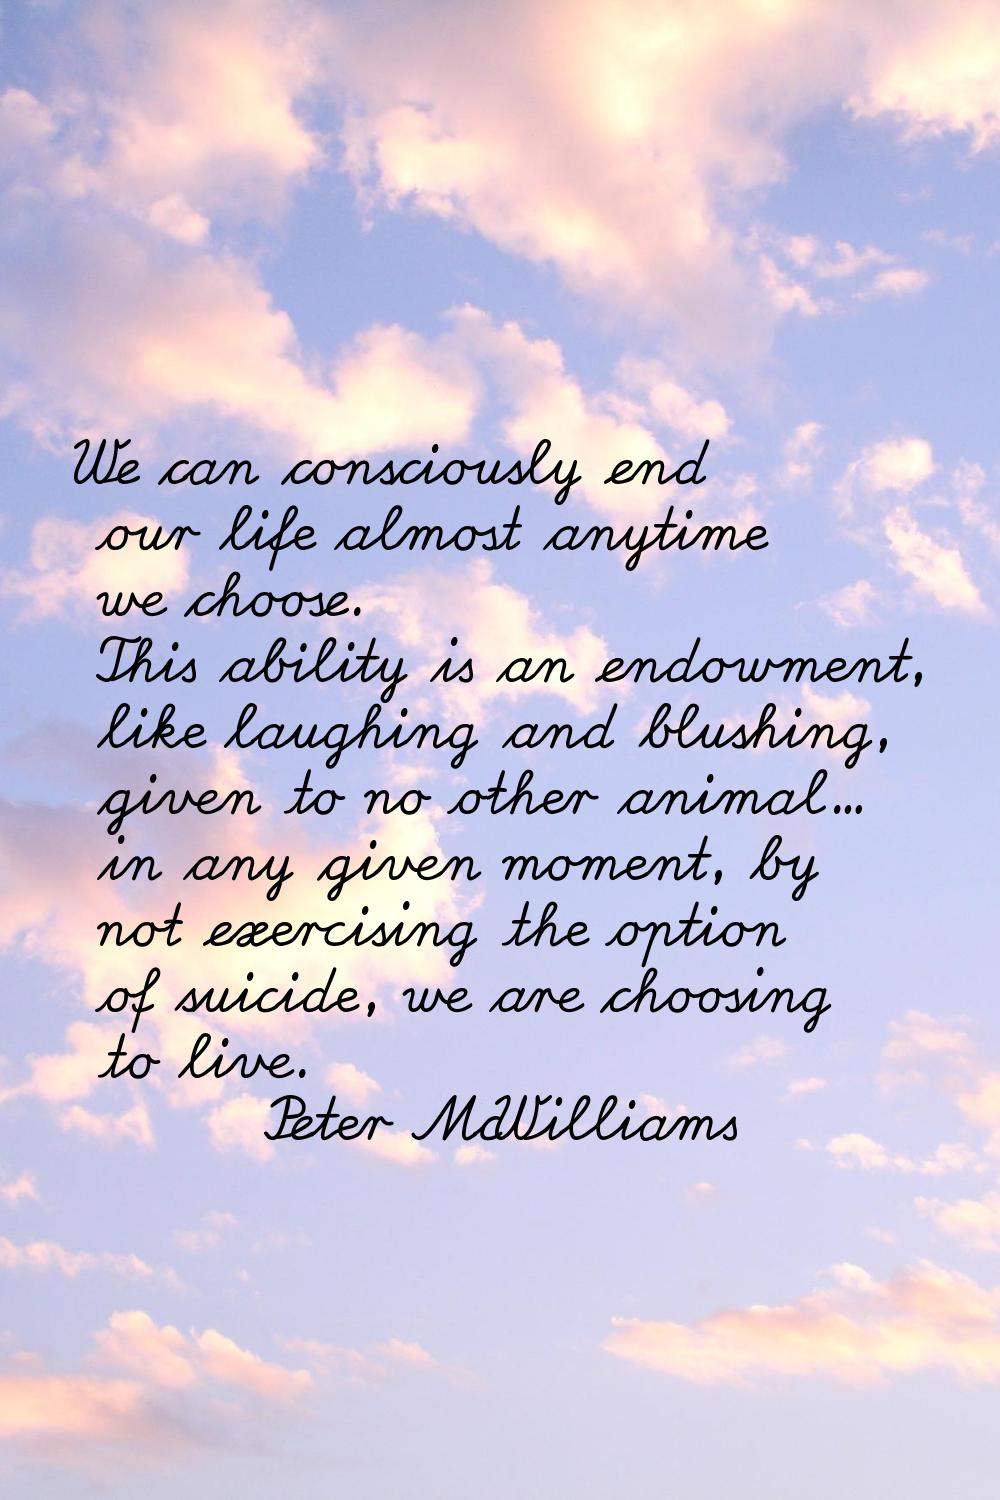 We can consciously end our life almost anytime we choose. This ability is an endowment, like laughi